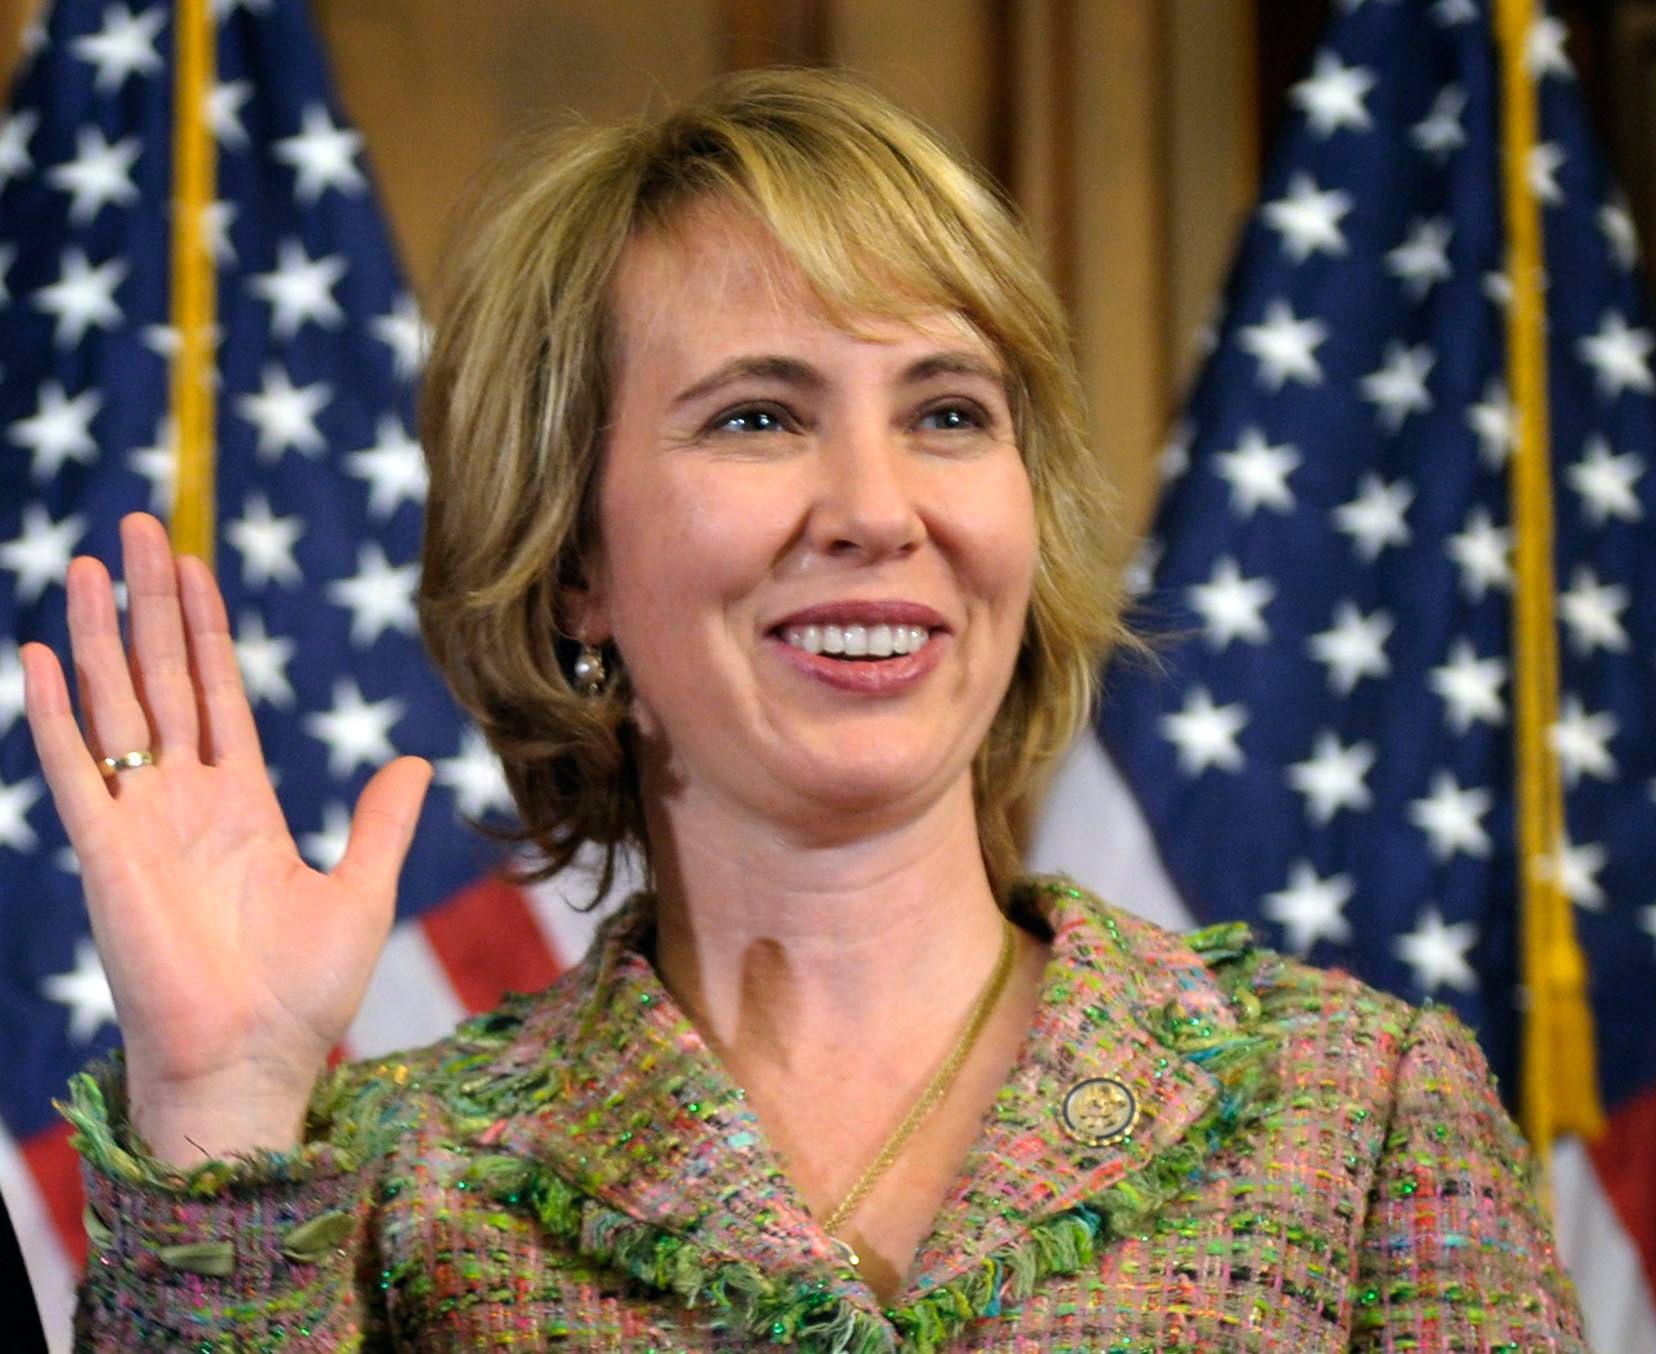 Rep. Gabrielle Giffords, D-Ariz., takes part in a reenactment of her swearing-in, on Capitol Hill in Washington, Jan. 5, 2011.